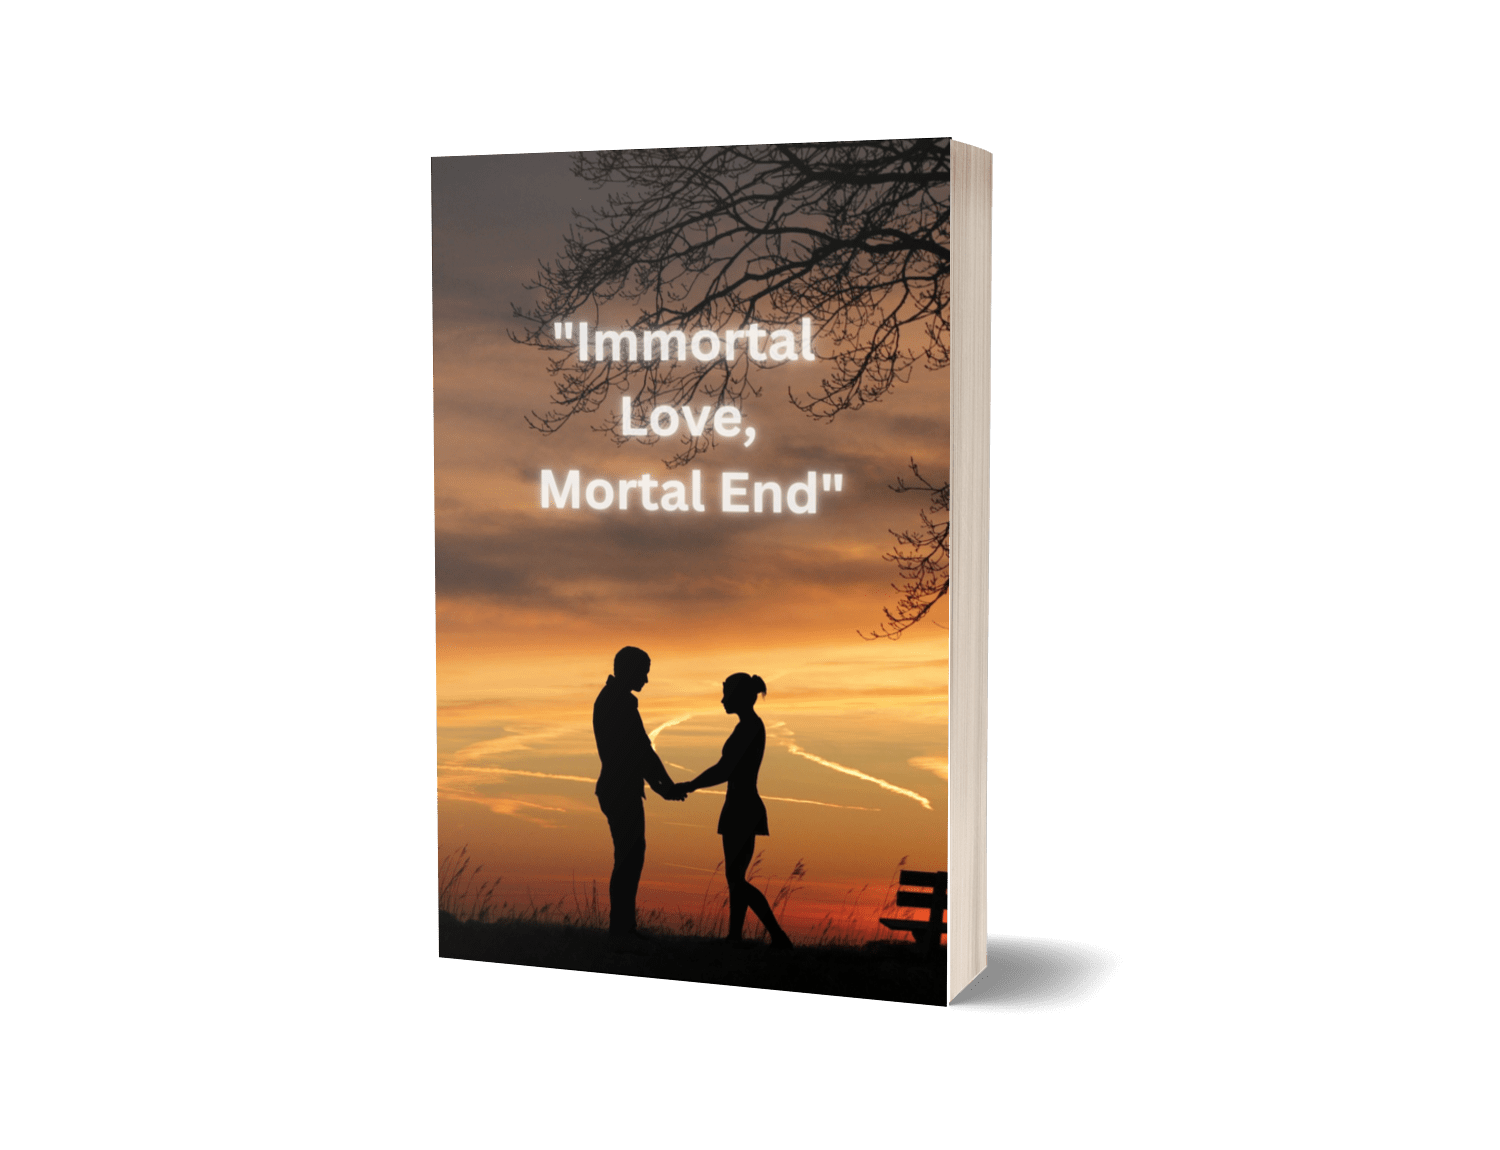 Immortal Love, Mortal End by Fasi Ud Din